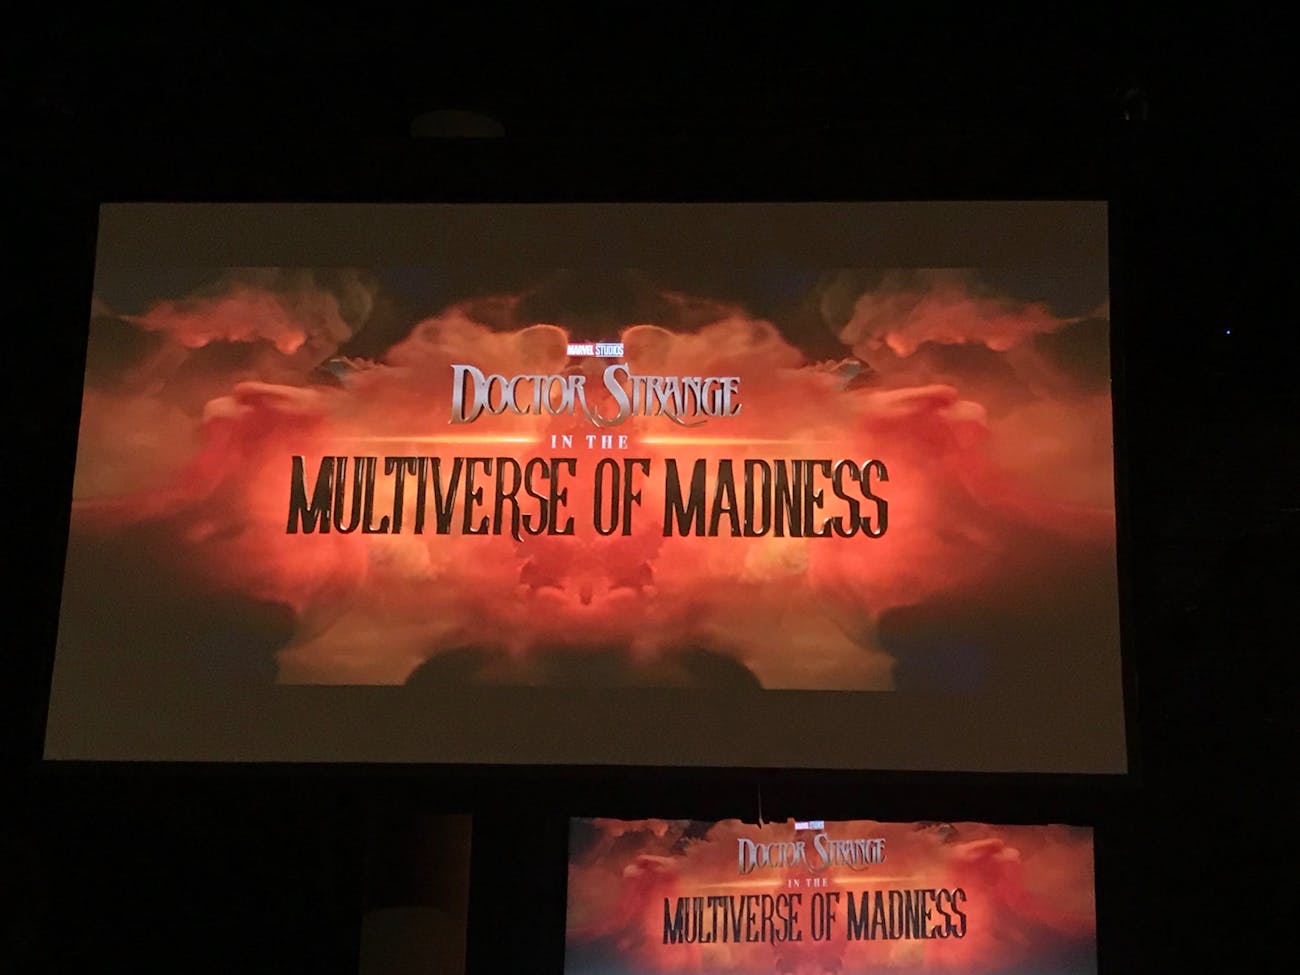 Doctor strange and the multiverse of madness